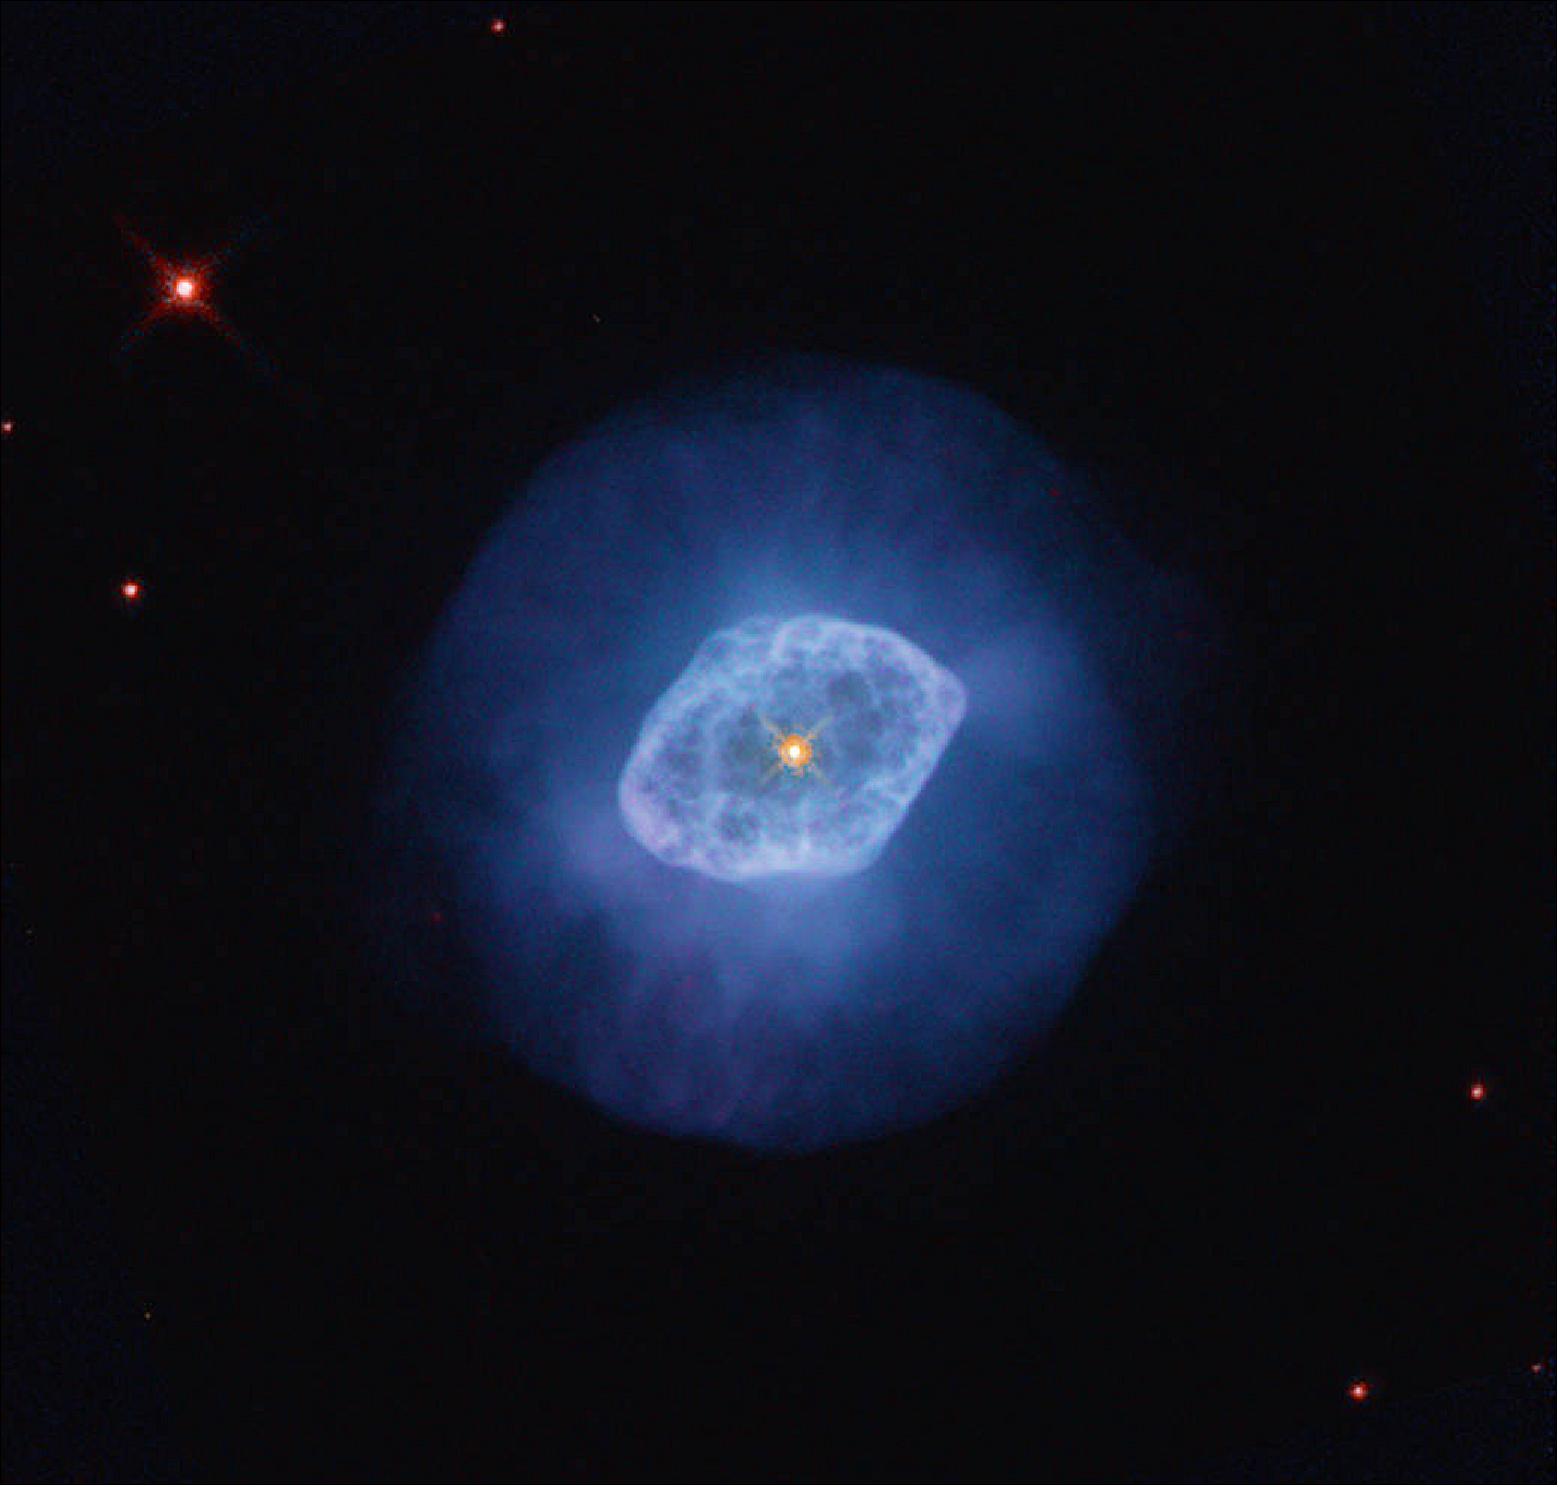 Figure 8: Hubble studied NGC 6891 as part of efforts to gauge the distances to nebulae, and to learn more about how their structures formed and evolved. NGC 6891 is made up of gas that’s been ionized by the central white dwarf star, which stripped electrons from the nebula’s hydrogen atoms. As the energized electrons revert from their higher-energy state to a lower-energy state by recombining with the hydrogen nuclei, they emit energy in the form of light, causing the nebula’s gas to glow [image credit: NASA, ESA, A. Hajian (University of Waterloo), H. Bond (Pennsylvania State University), and B. Balick (University of Washington); Processing: Gladys Kober (NASA/Catholic University of America)]